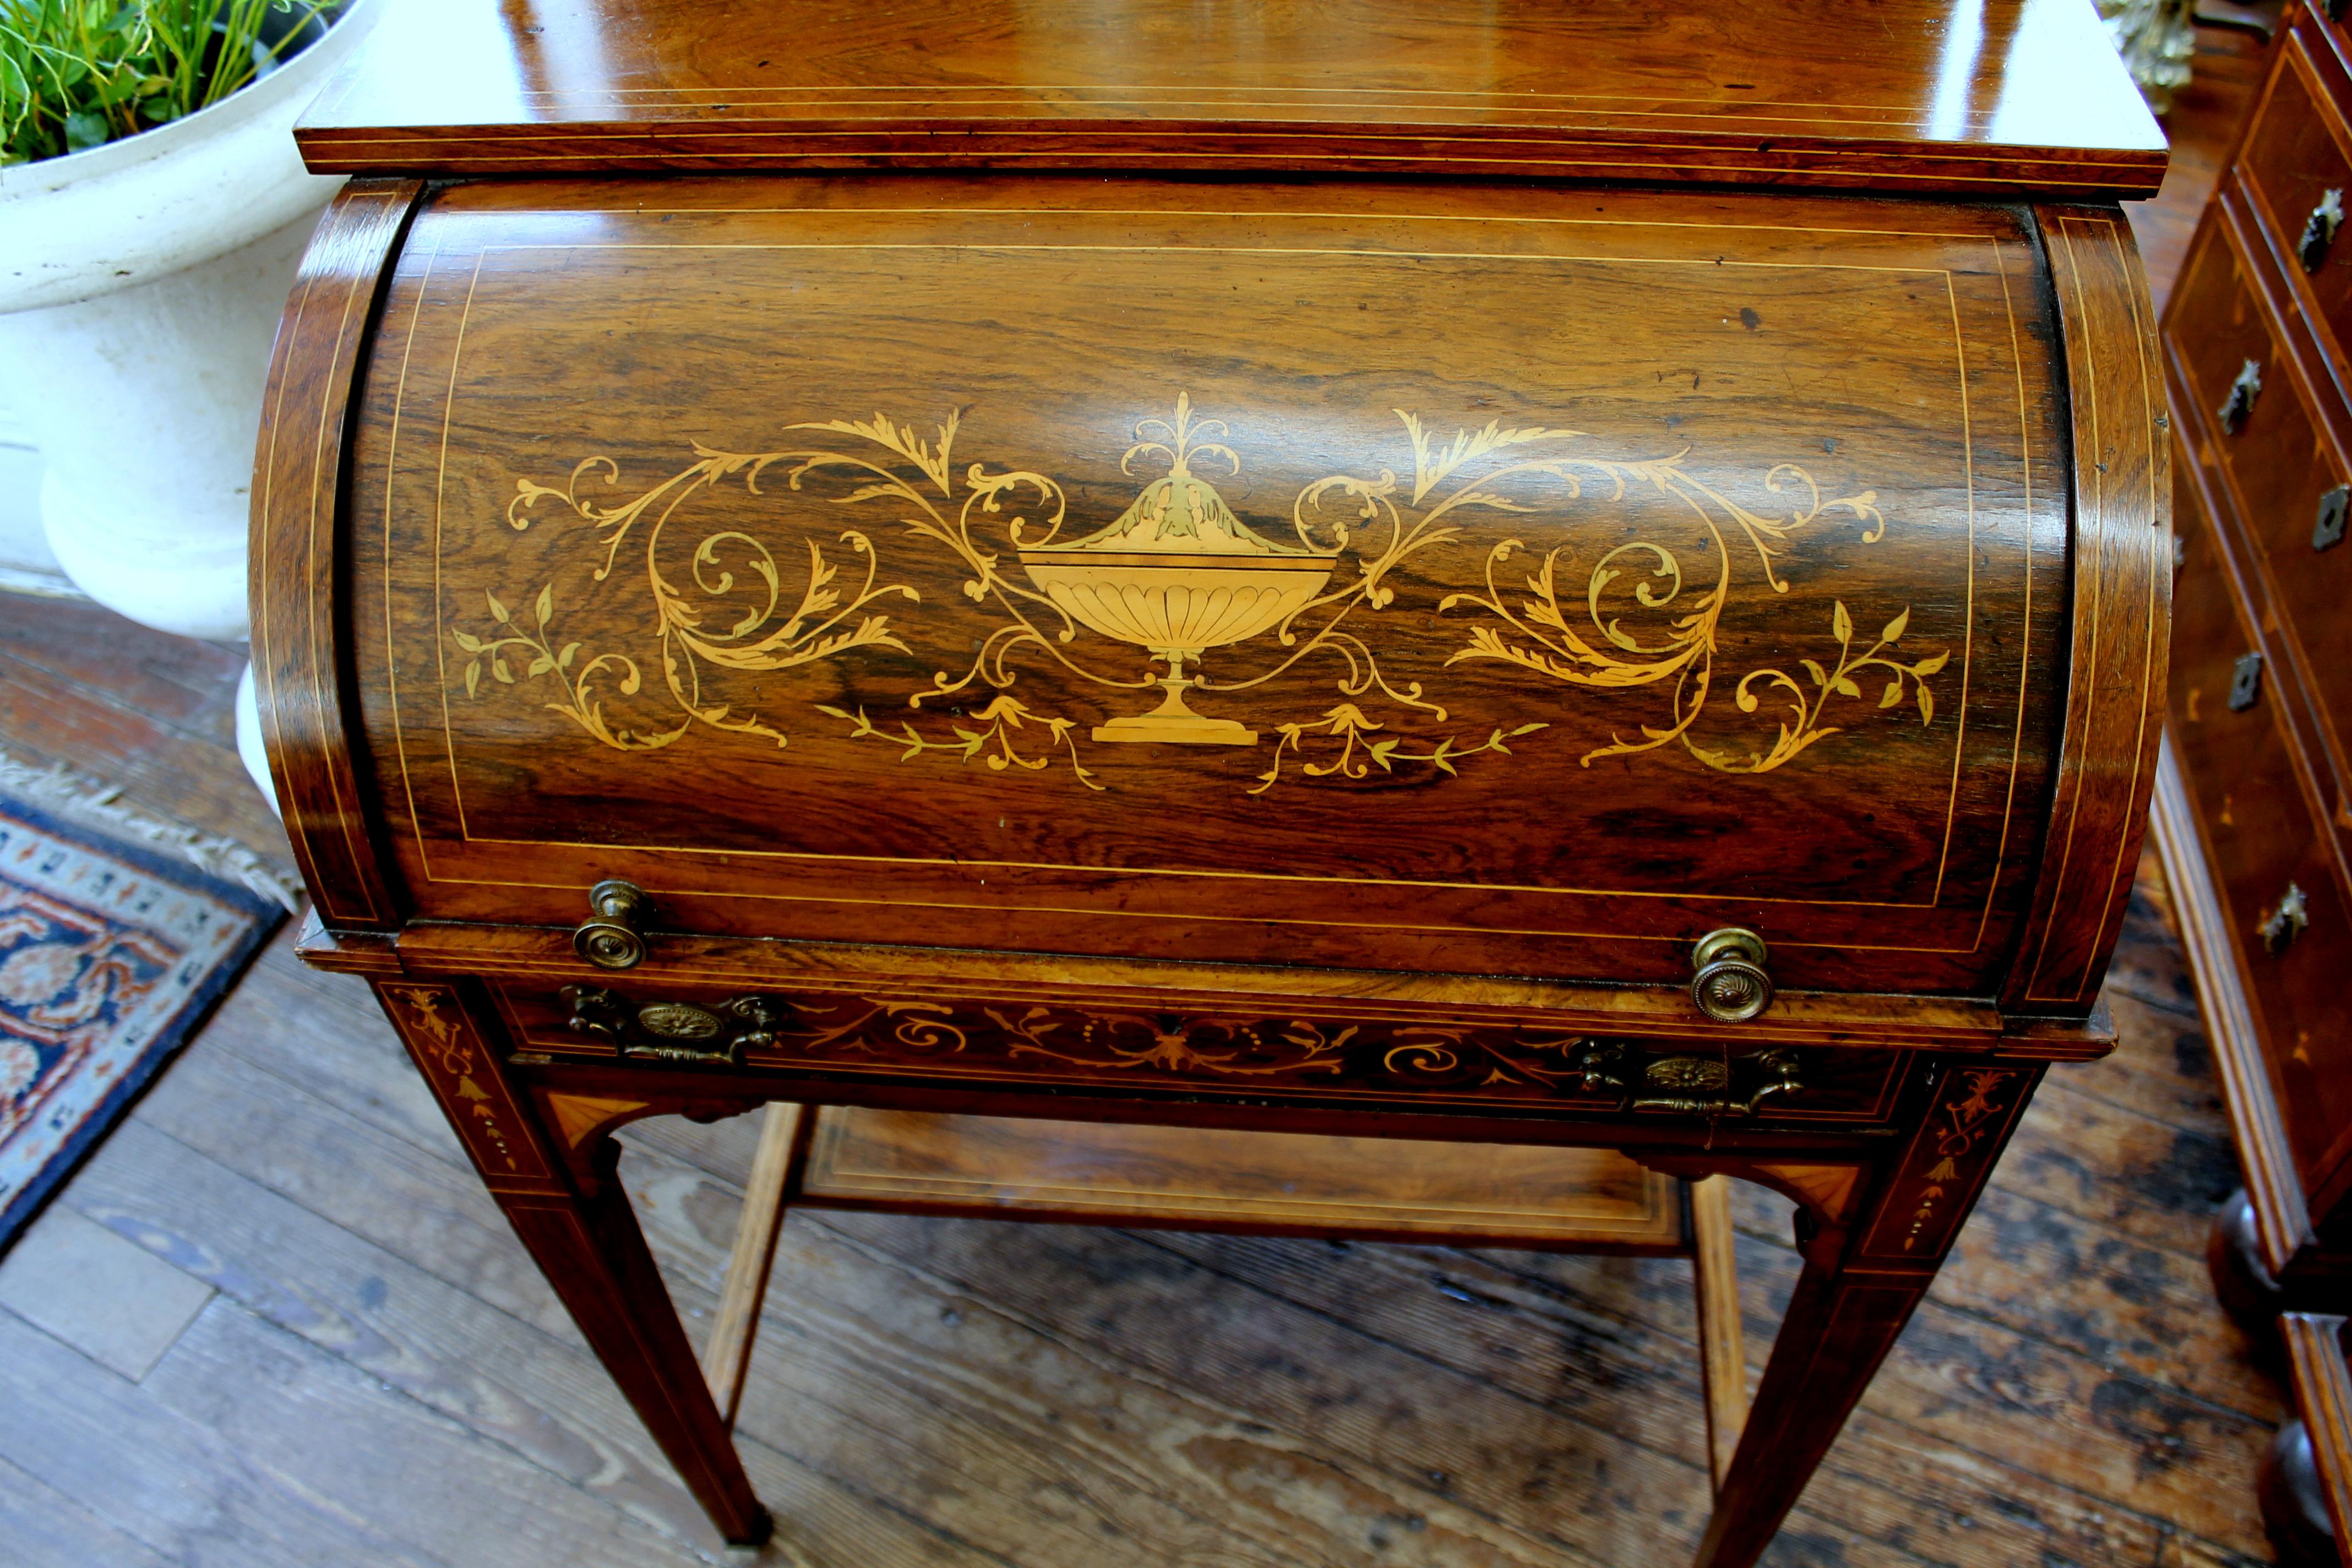 Hand-Crafted Antique English Marquetry Inlaid Rosewood Cylinder-Top Ladies Writing Desk